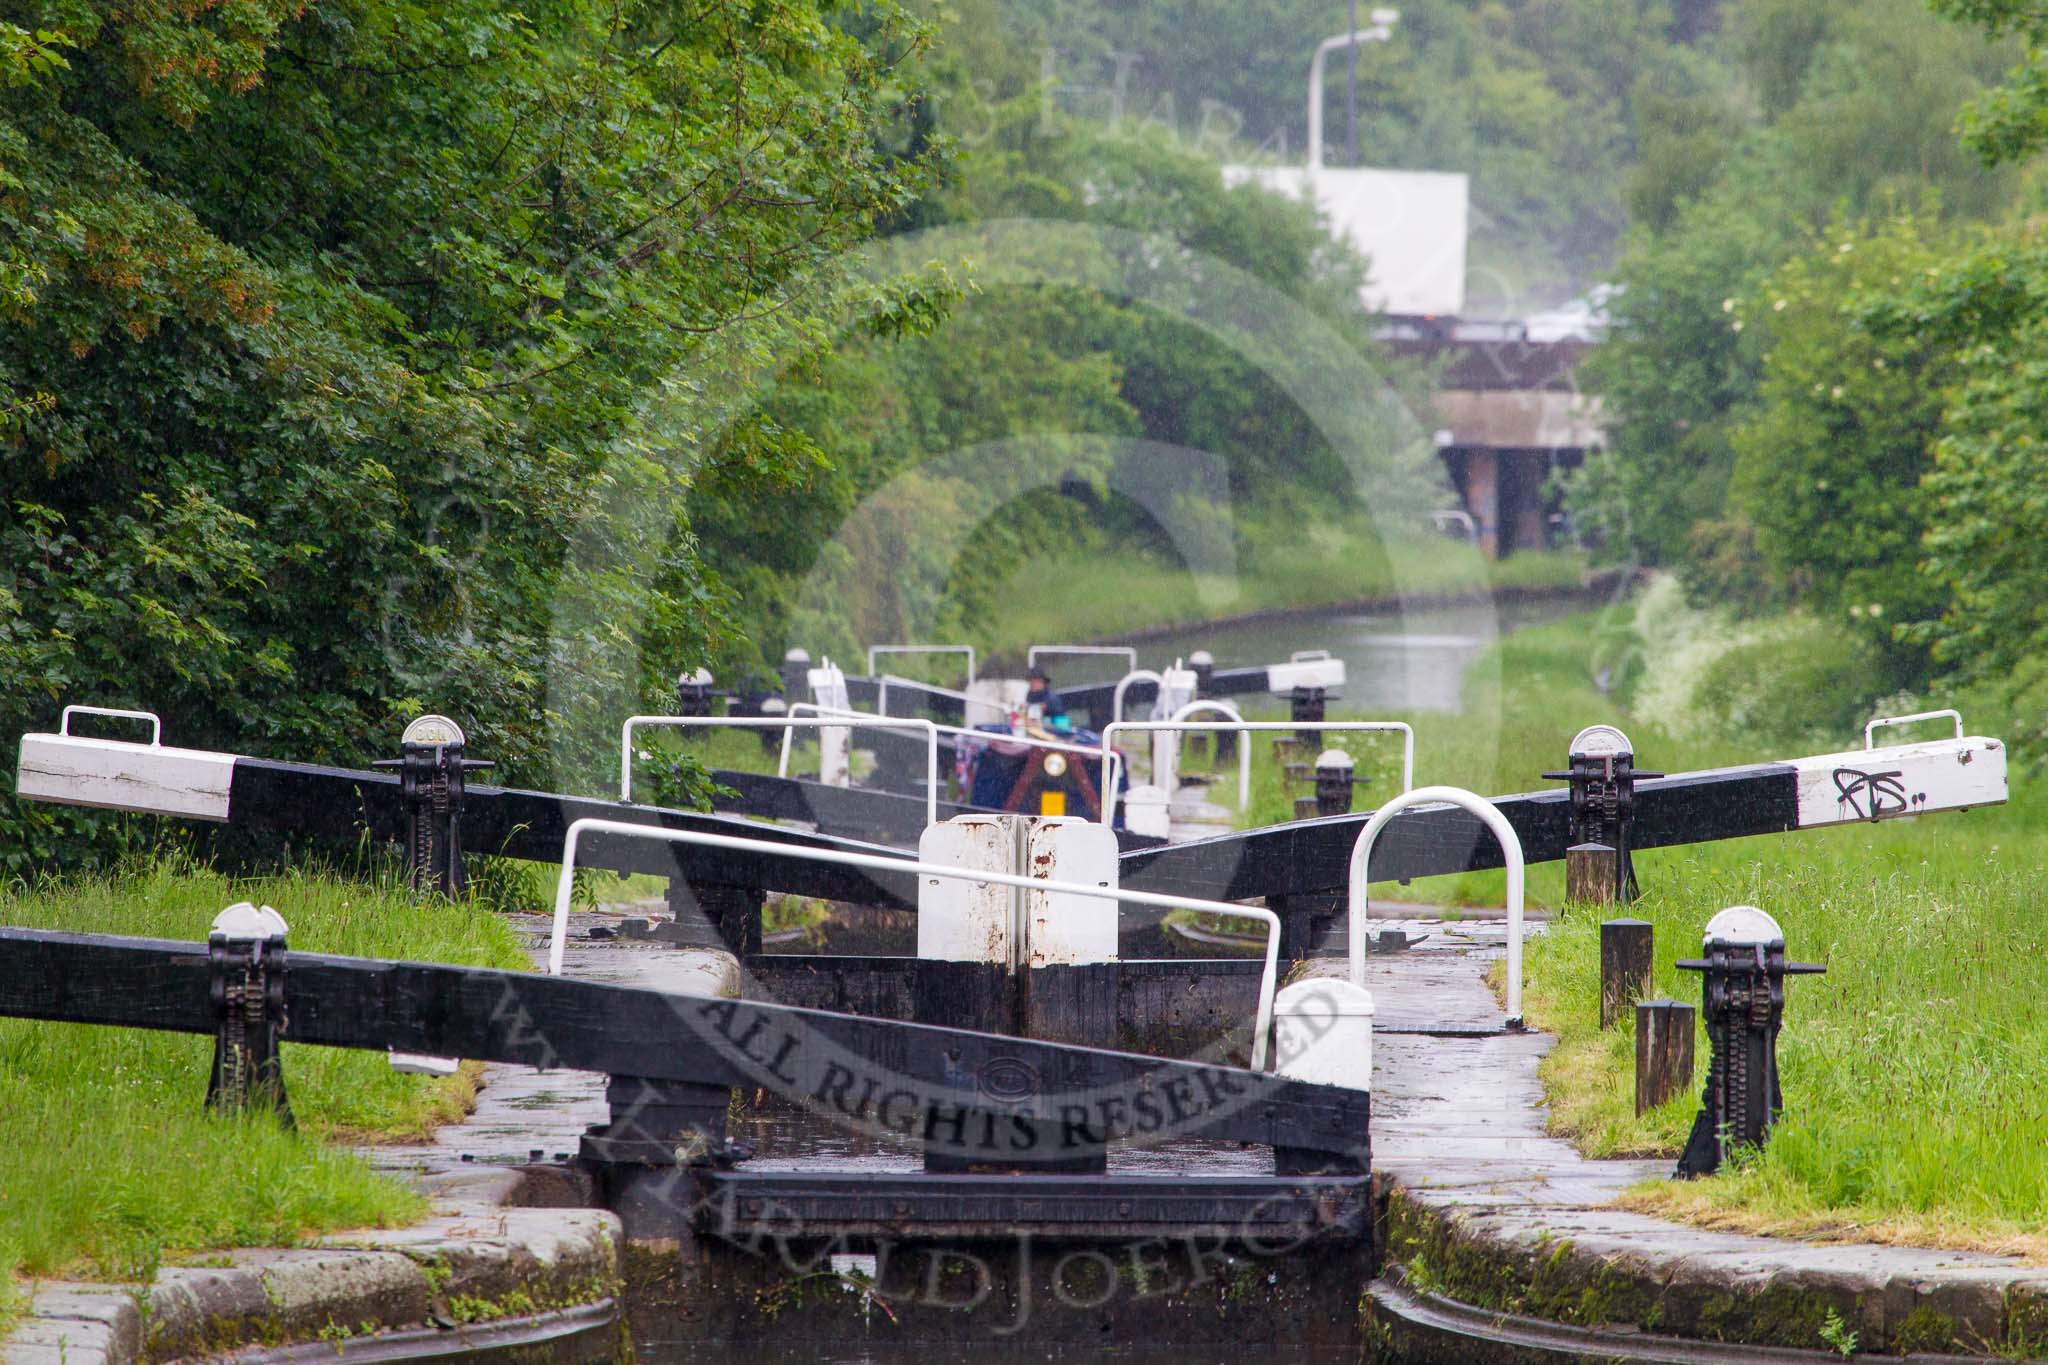 BCN Marathon Challenge 2014: Looking down the Perry Bar Locks on the Tame Valley Canal from the pond between locks 6 and 7, with the M6 motorway in the background.
Birmingham Canal Navigation,


United Kingdom,
on 24 May 2014 at 13:57, image #120